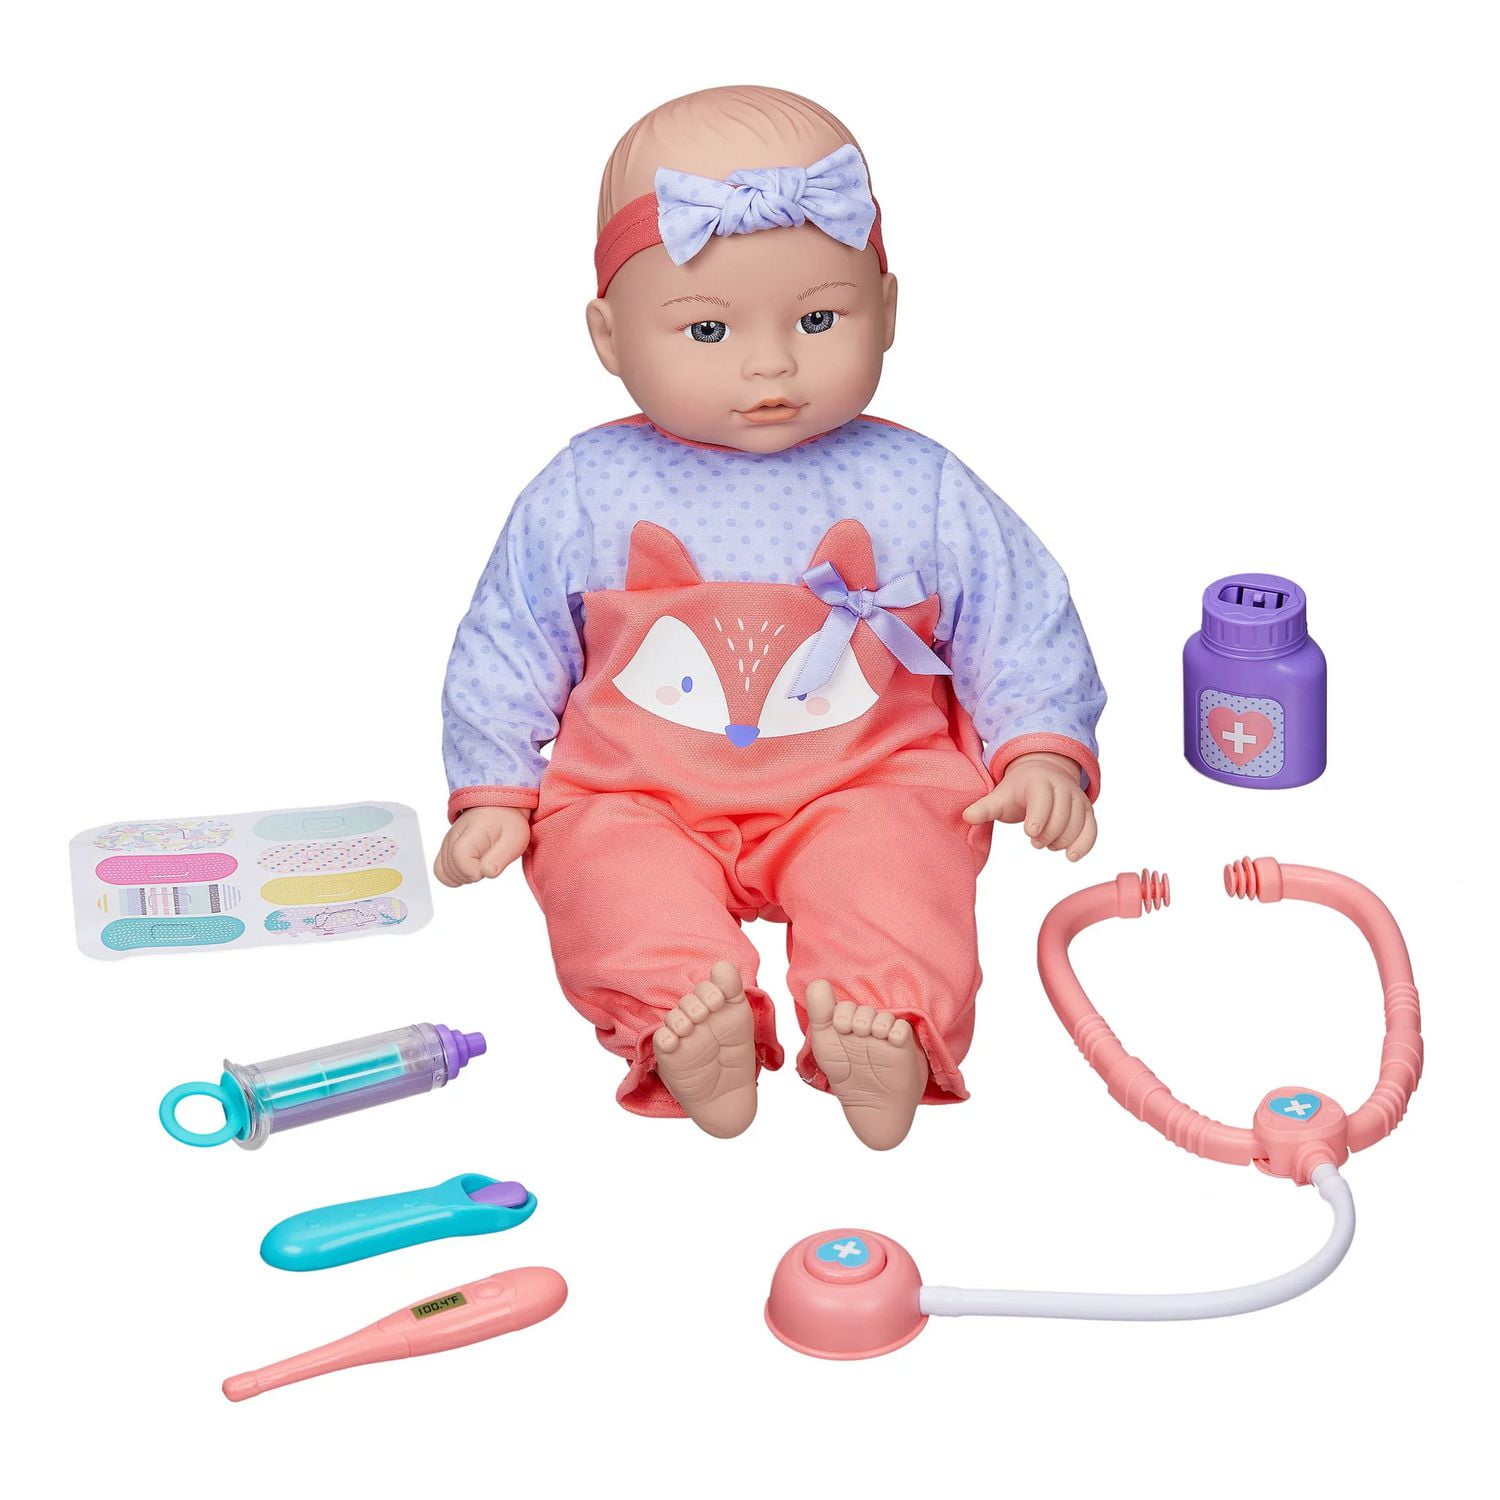 My Sweet Baby 16 Get Better Now Baby Doll Play Set, 9 Pieces Included, Doll  with doctor play set 